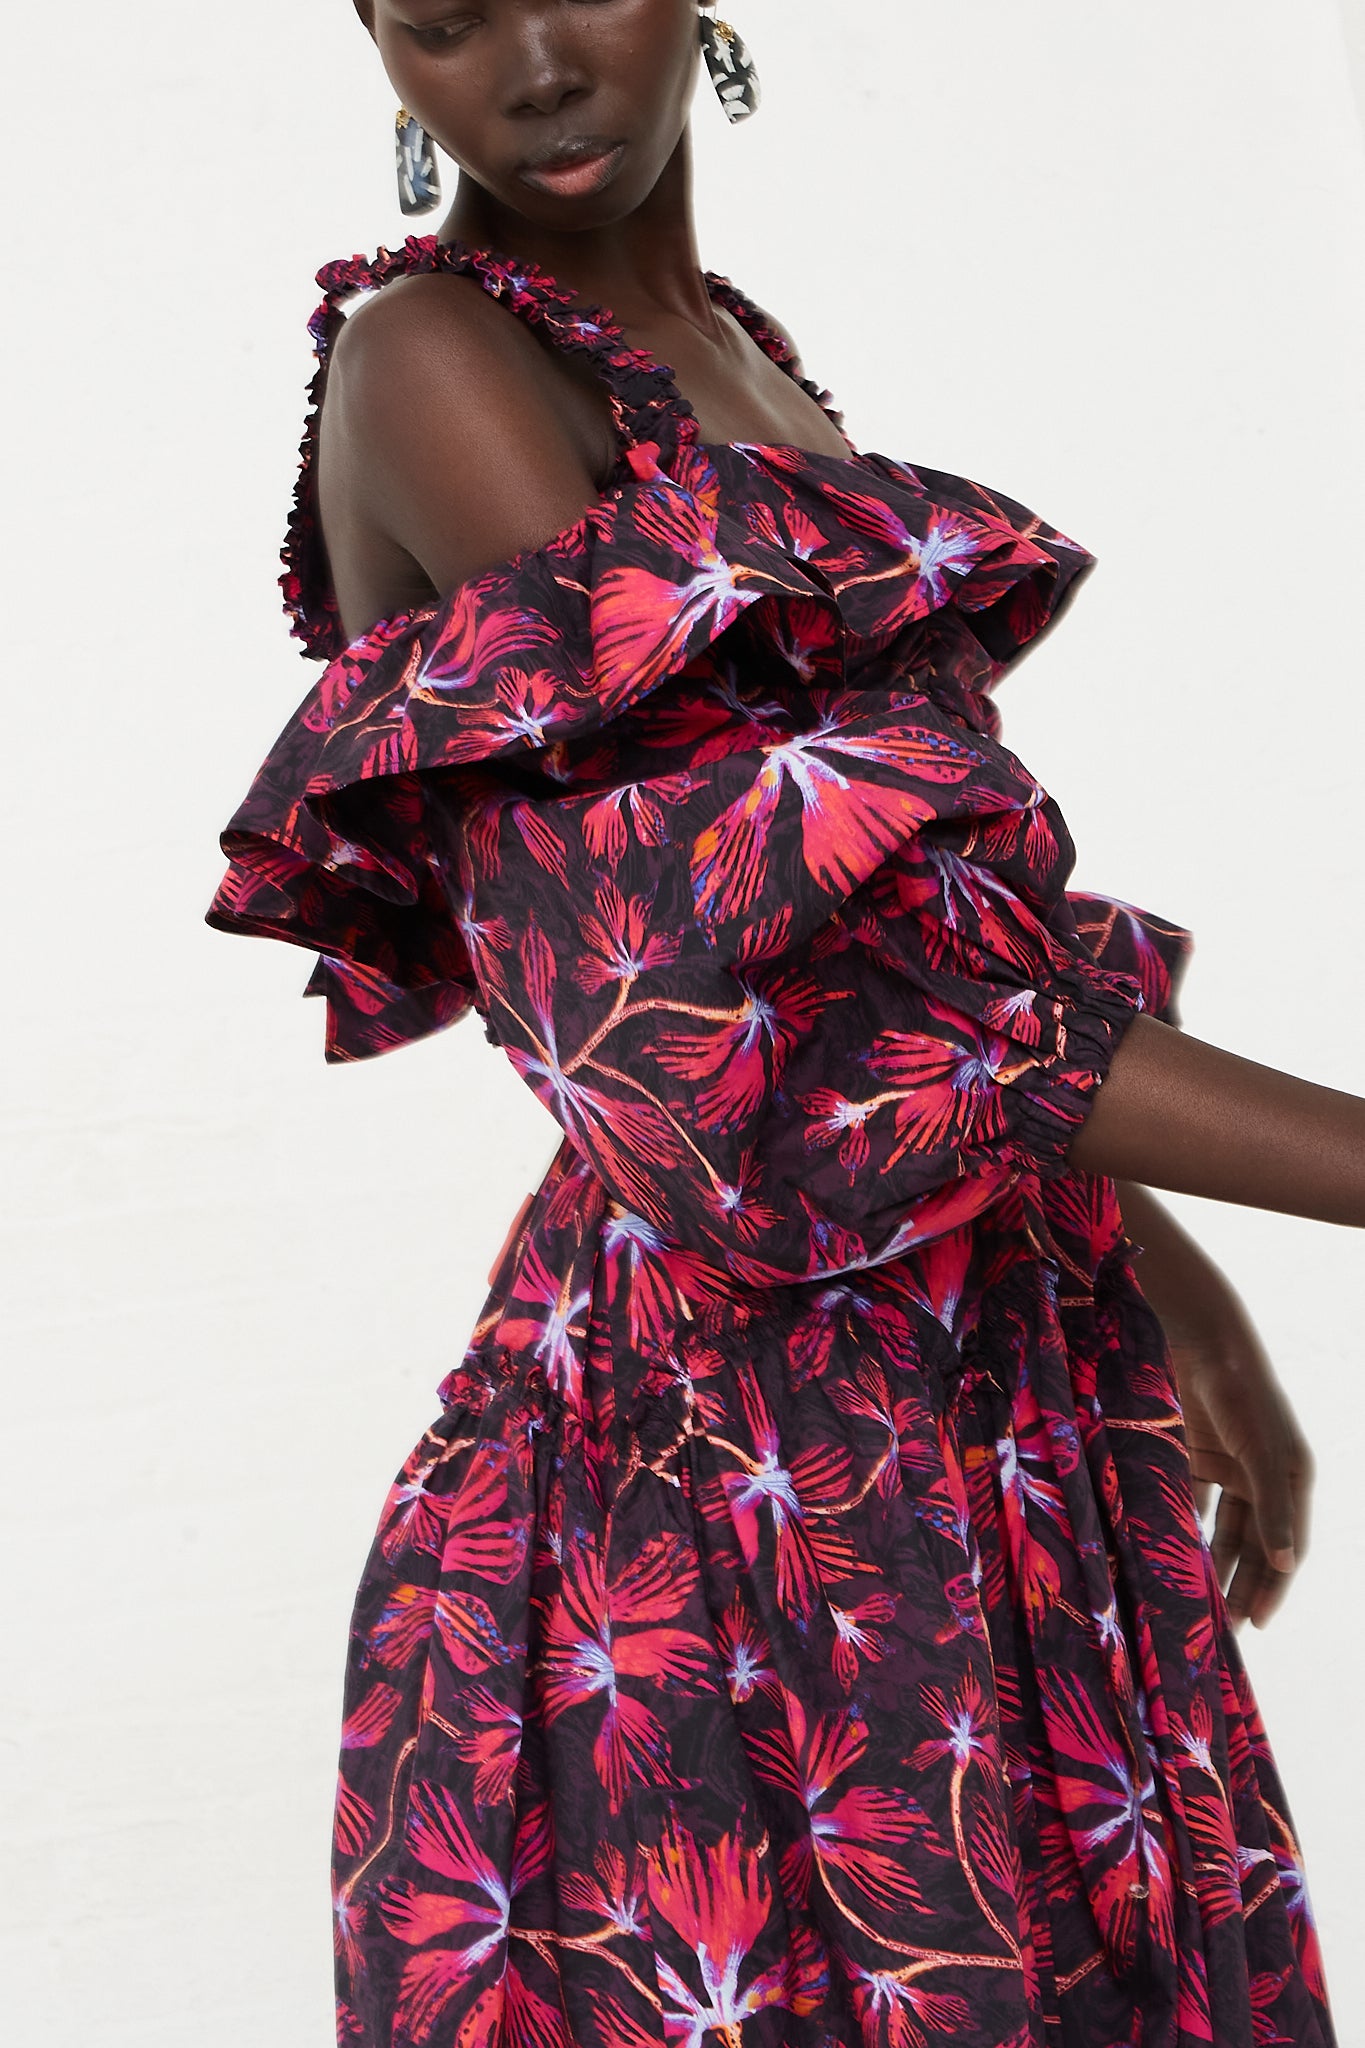 The model is wearing an Ulla Johnson Caprice Midi Dress in Zinnia, featuring vivid shades of magenta and hyacinth.